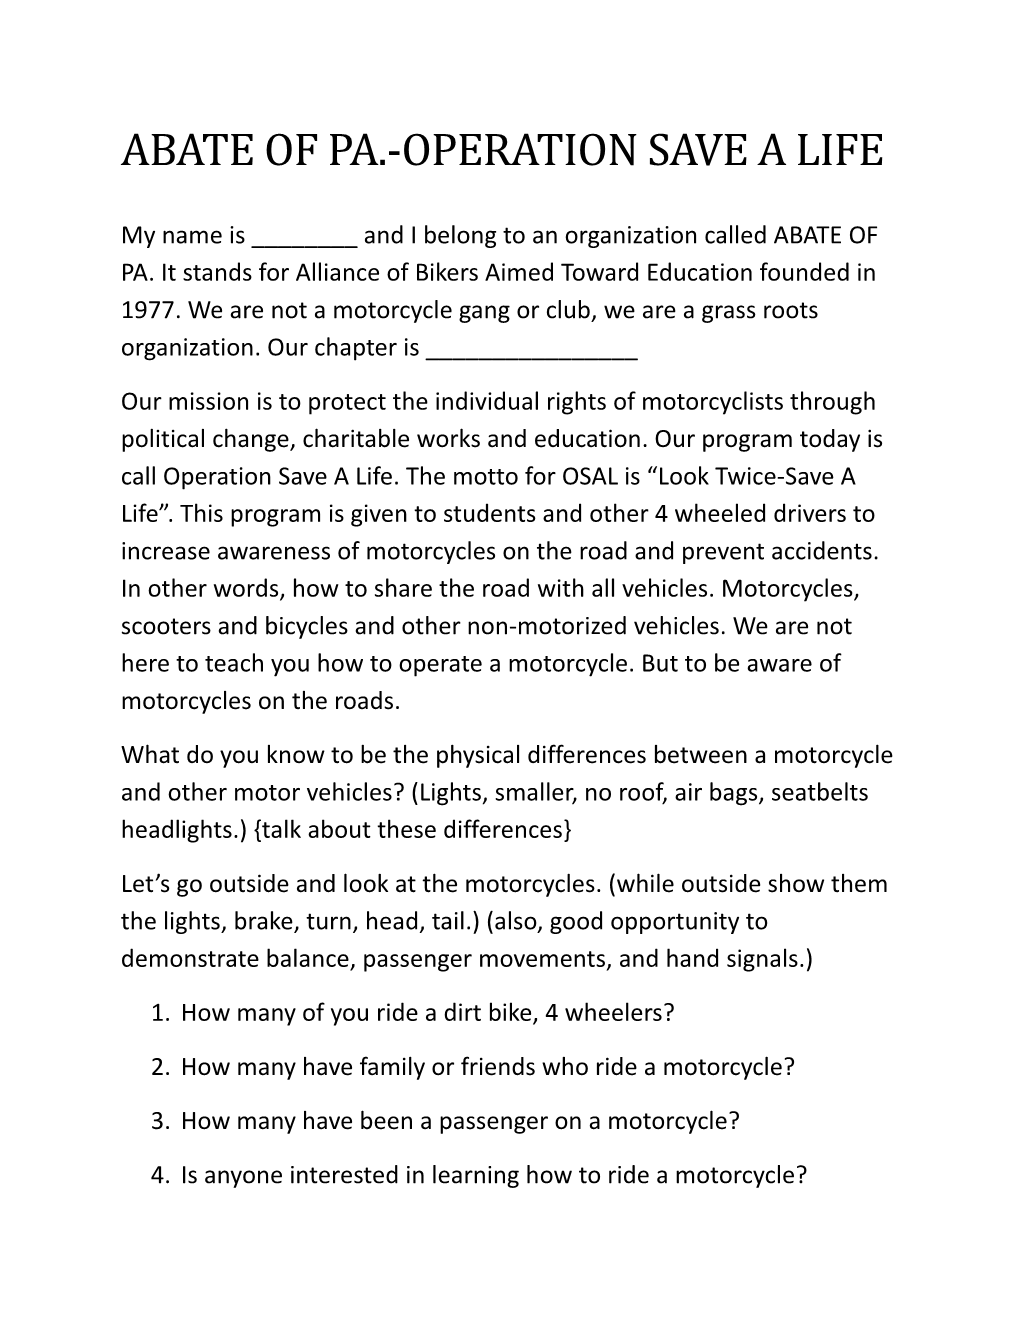 Abate of Pa.-Operation Save a Life